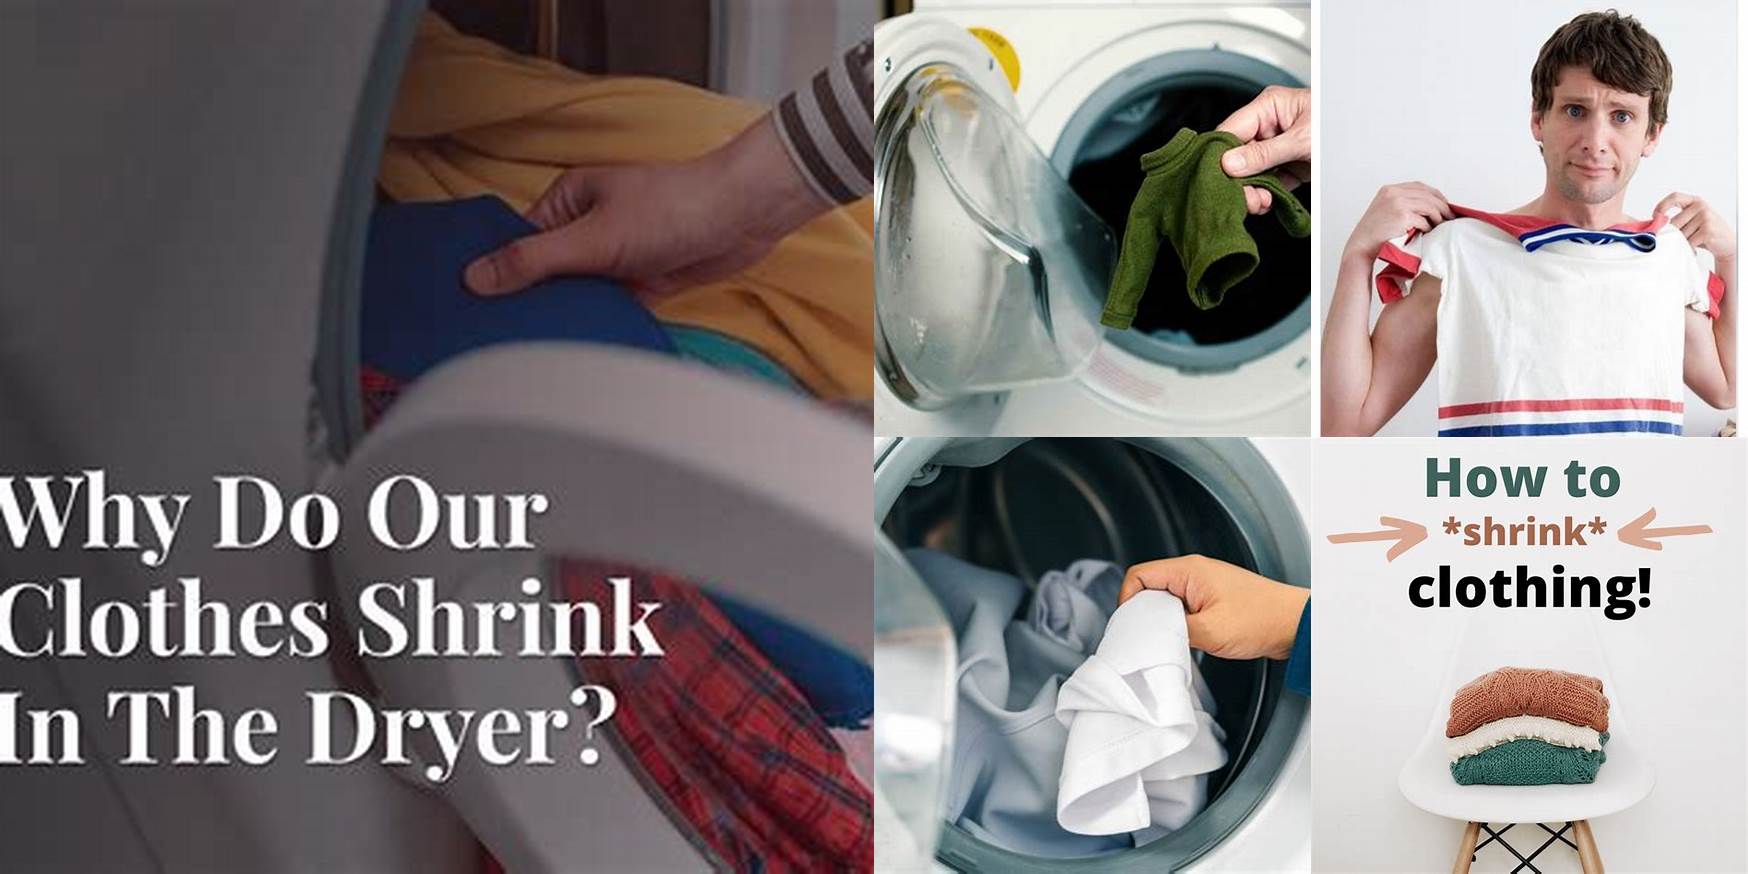 Does Dry Clean Shrink Clothes